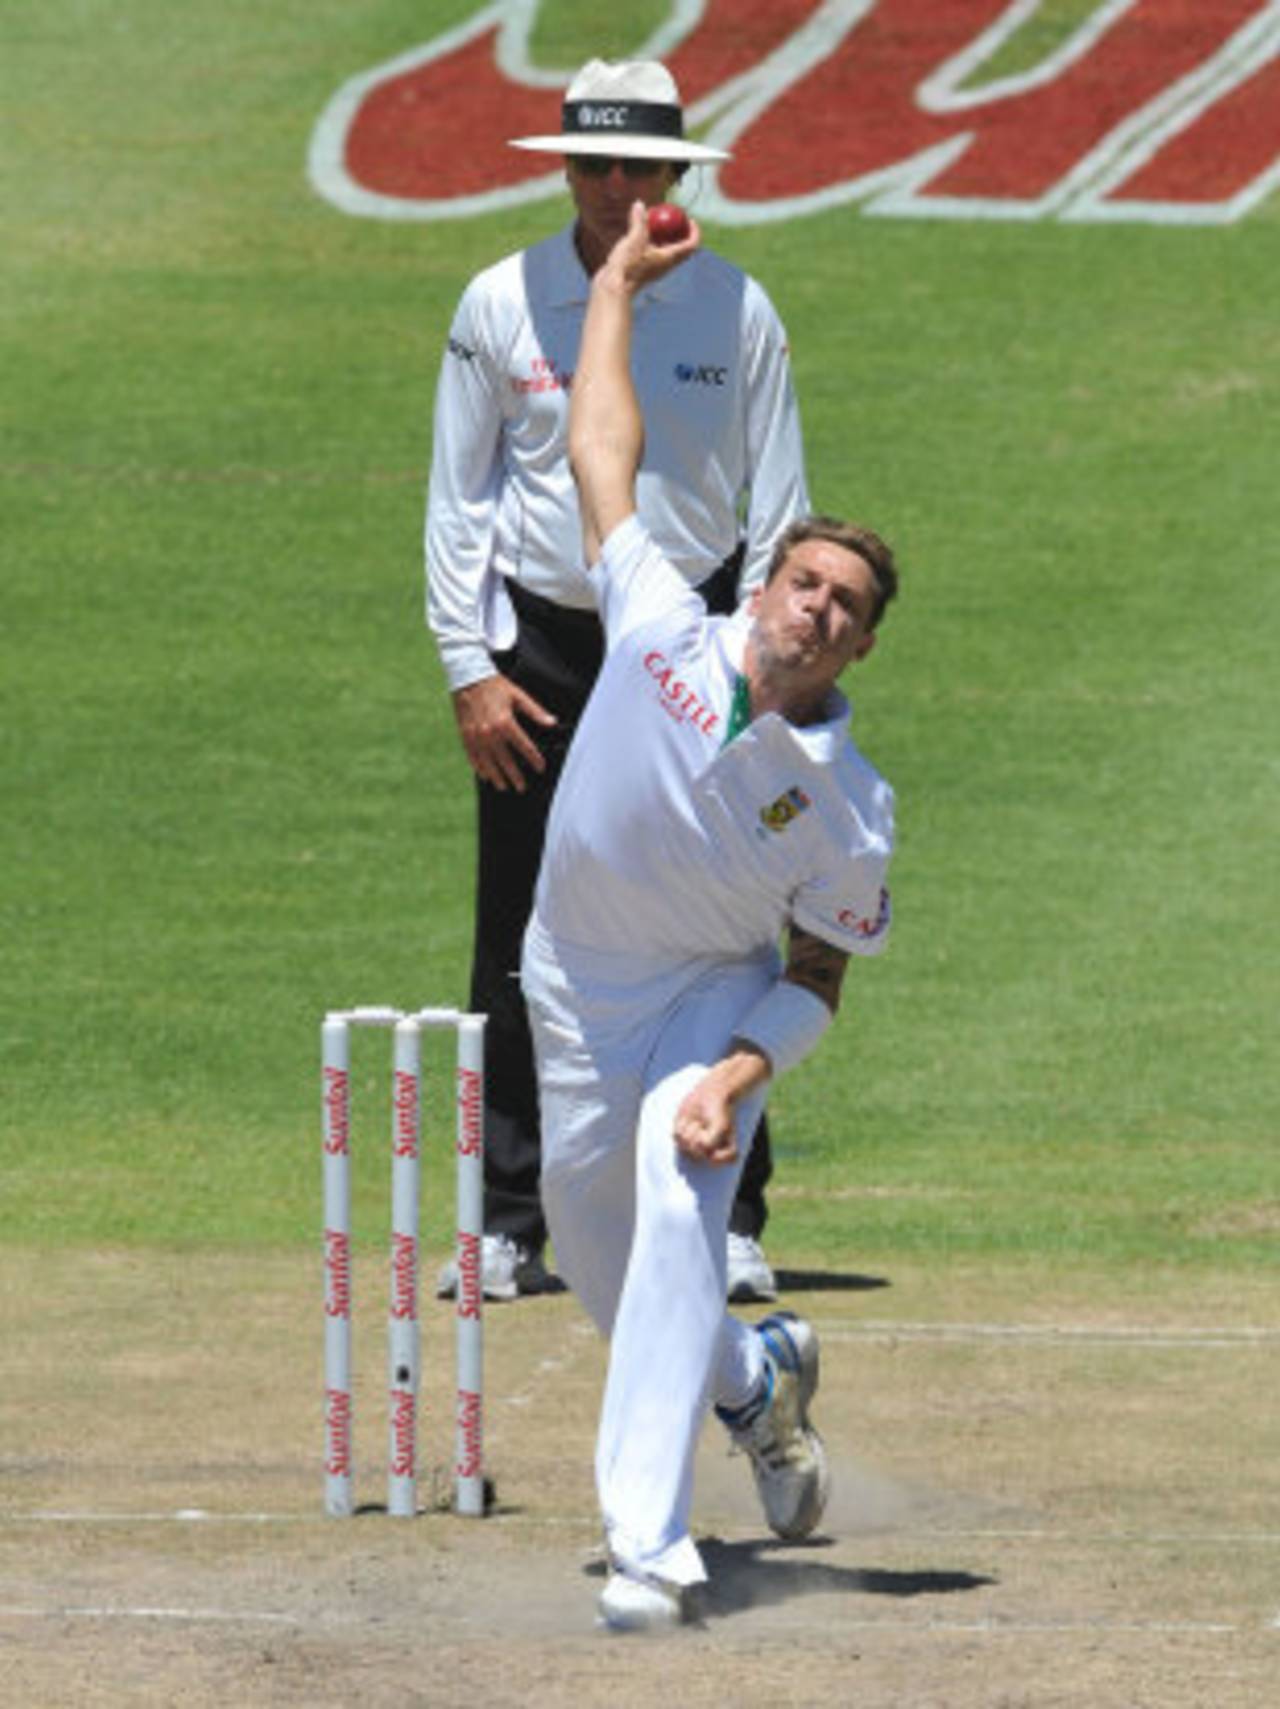 Dale Steyn, described as a "freak" by Rob Walter, South Africa's fitness trainer, showed his skills on day three&nbsp;&nbsp;&bull;&nbsp;&nbsp;Getty Images